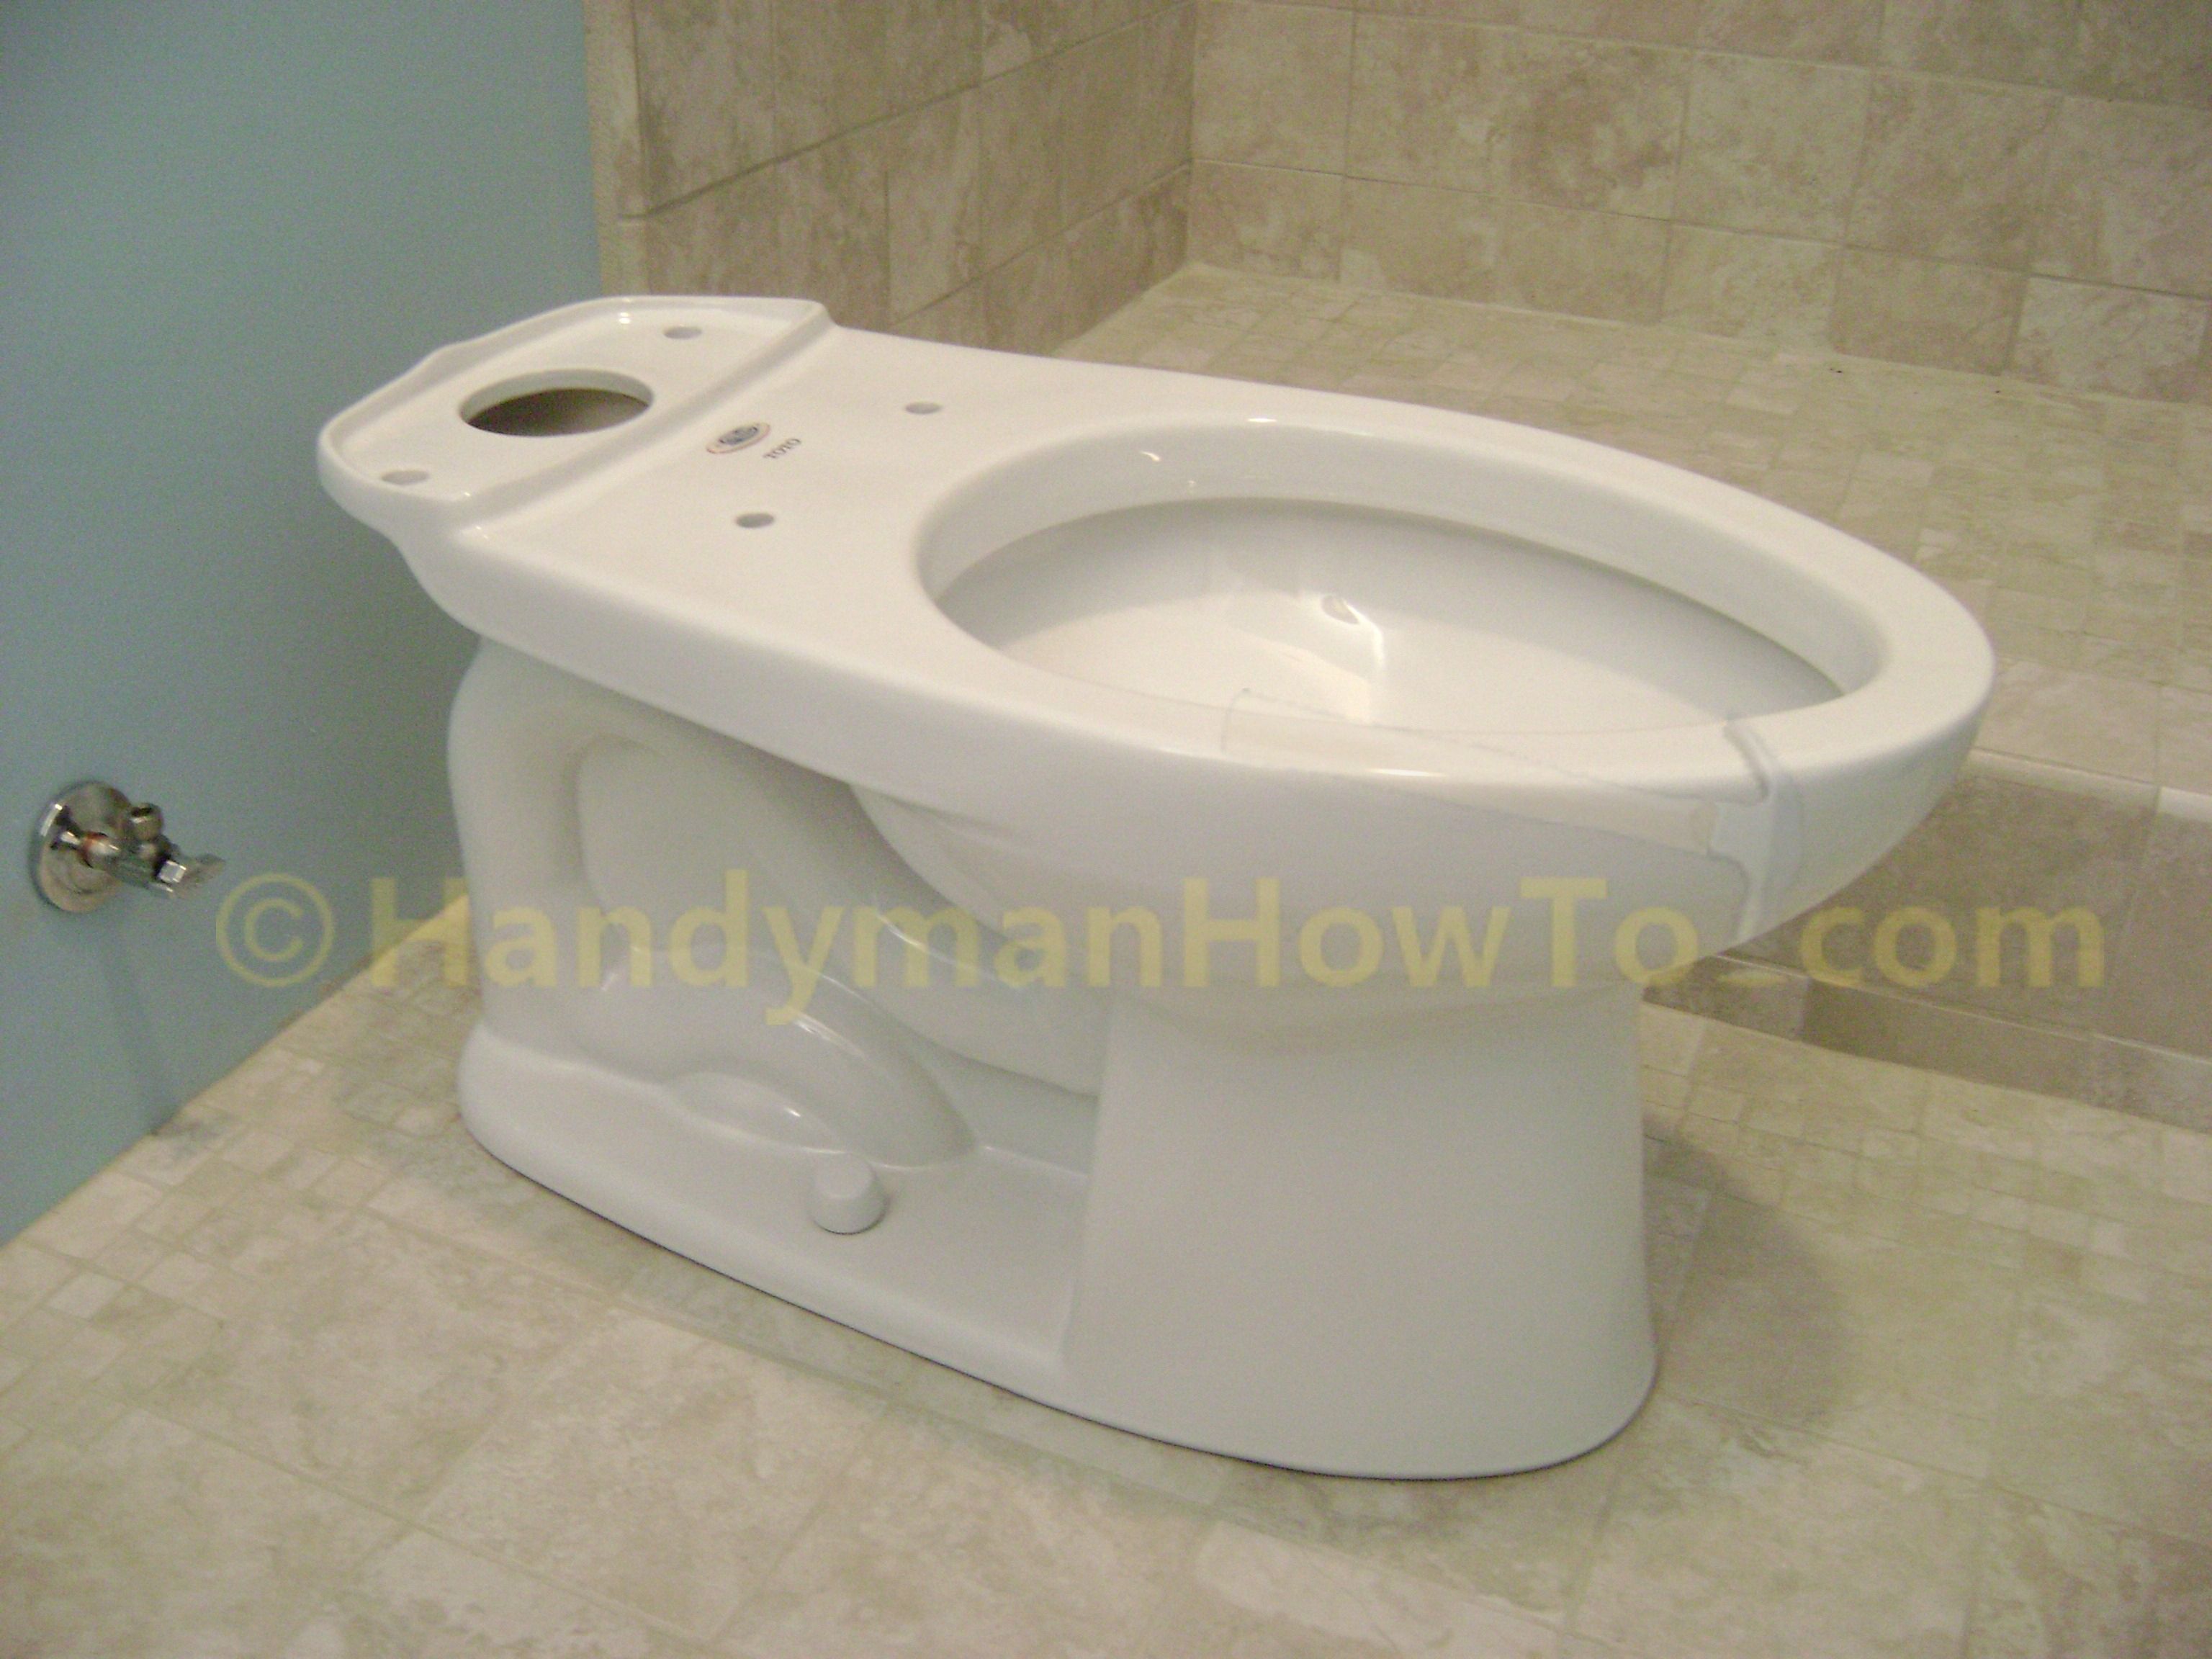 How To Finish A Basement Bathroom Install The Toilet